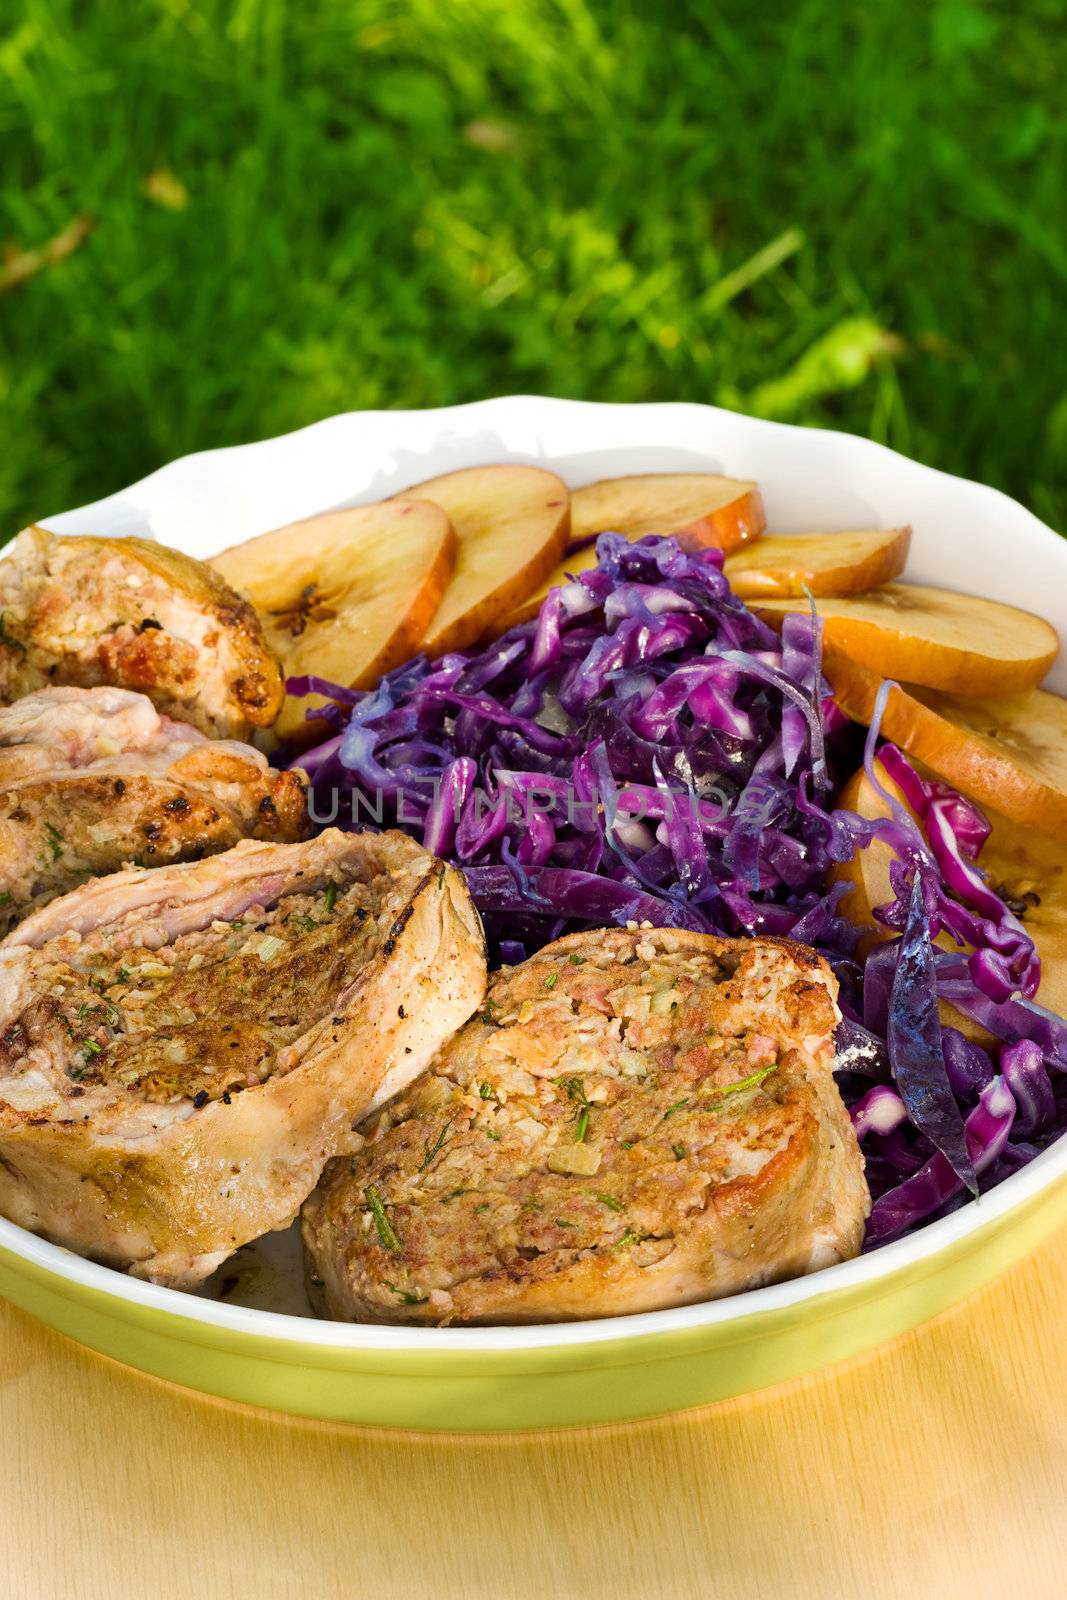 Pork medallions with apples and cabbage by Gravicapa